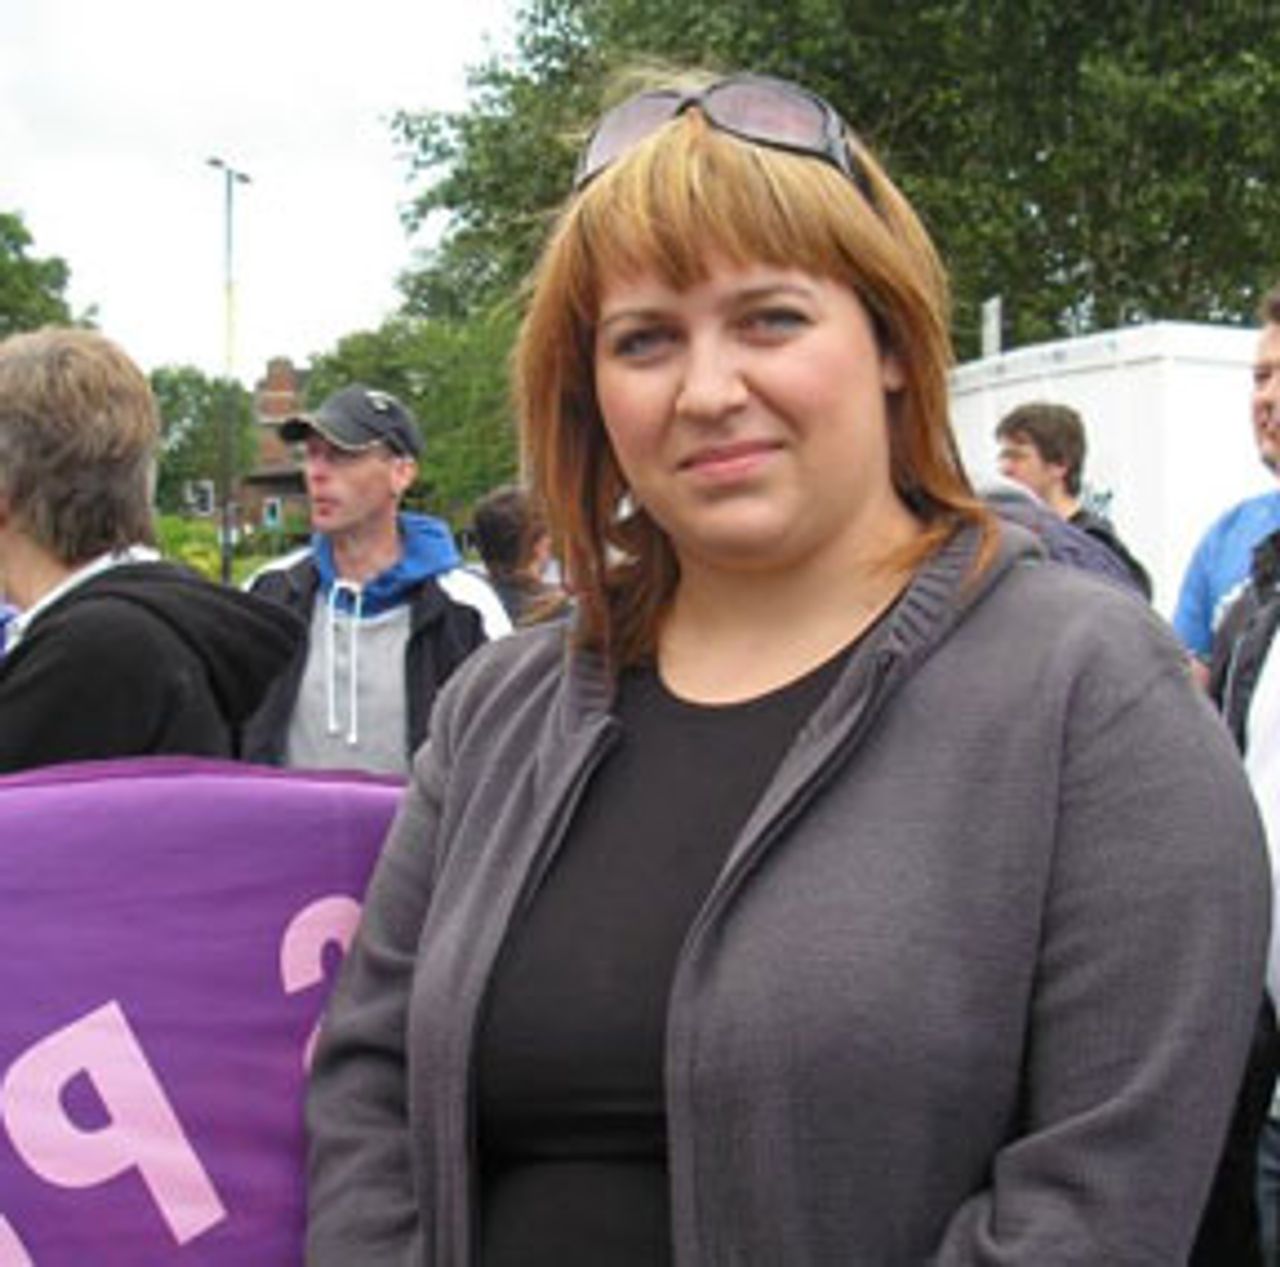 Olga Gajczyk, a lecturer, at the University and College Union demonstration